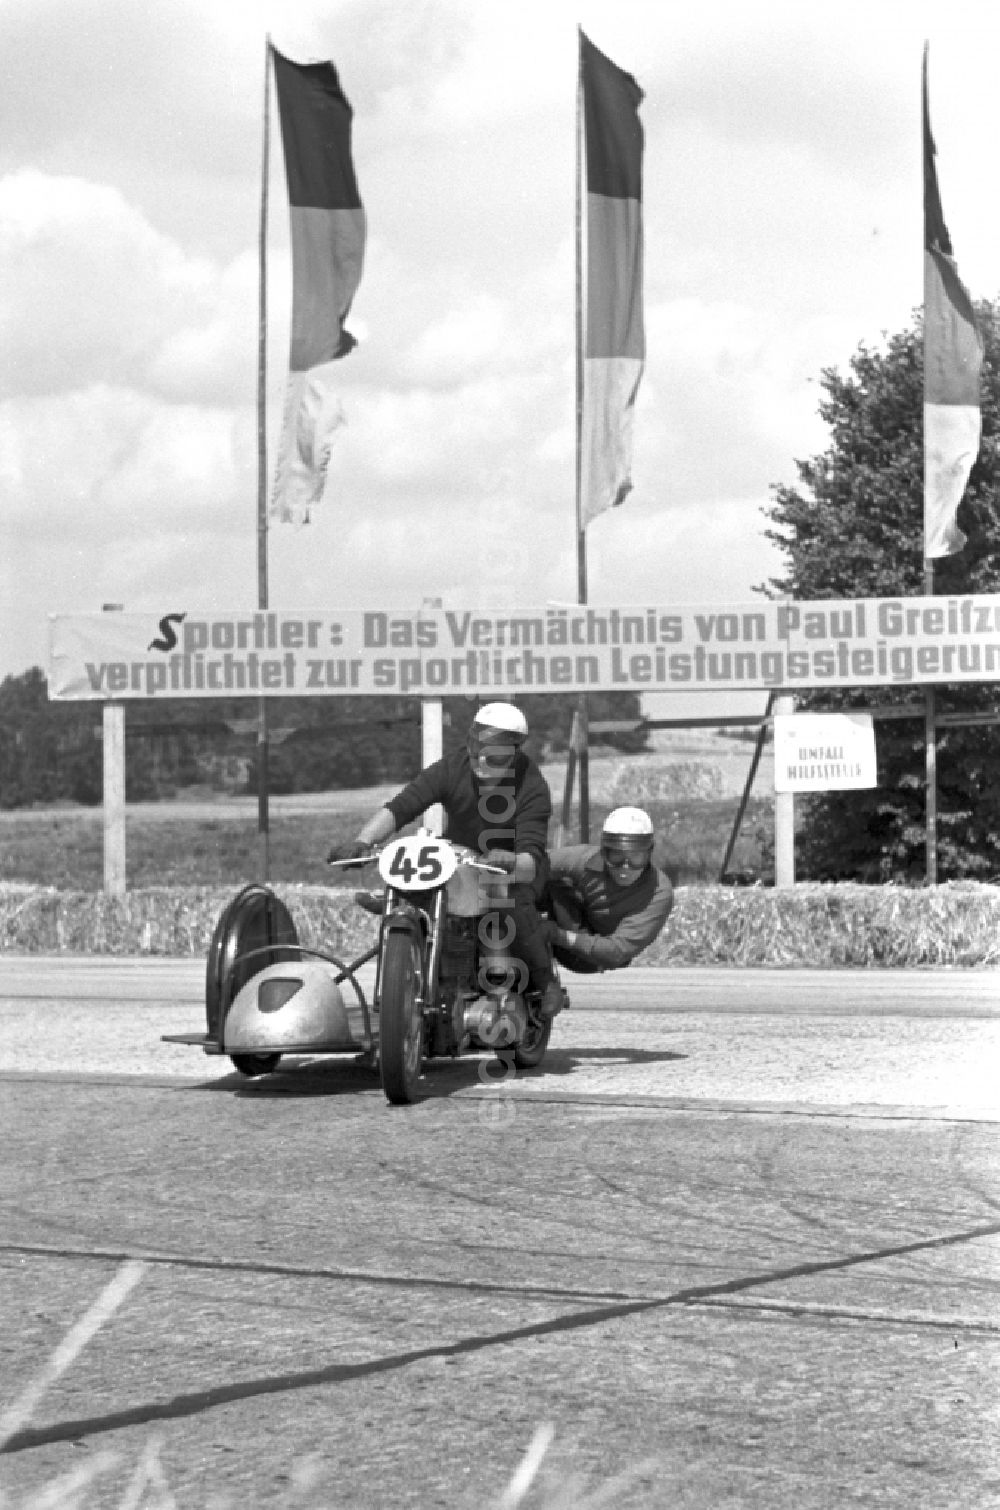 GDR photo archive: Dresden - Competition racing and motorsport event Autobahn spider - international car and motorcycle race on the Autobahn in the district of Hellerau in Dresden in the state of Saxony on the territory of the former GDR, German Democratic Republic